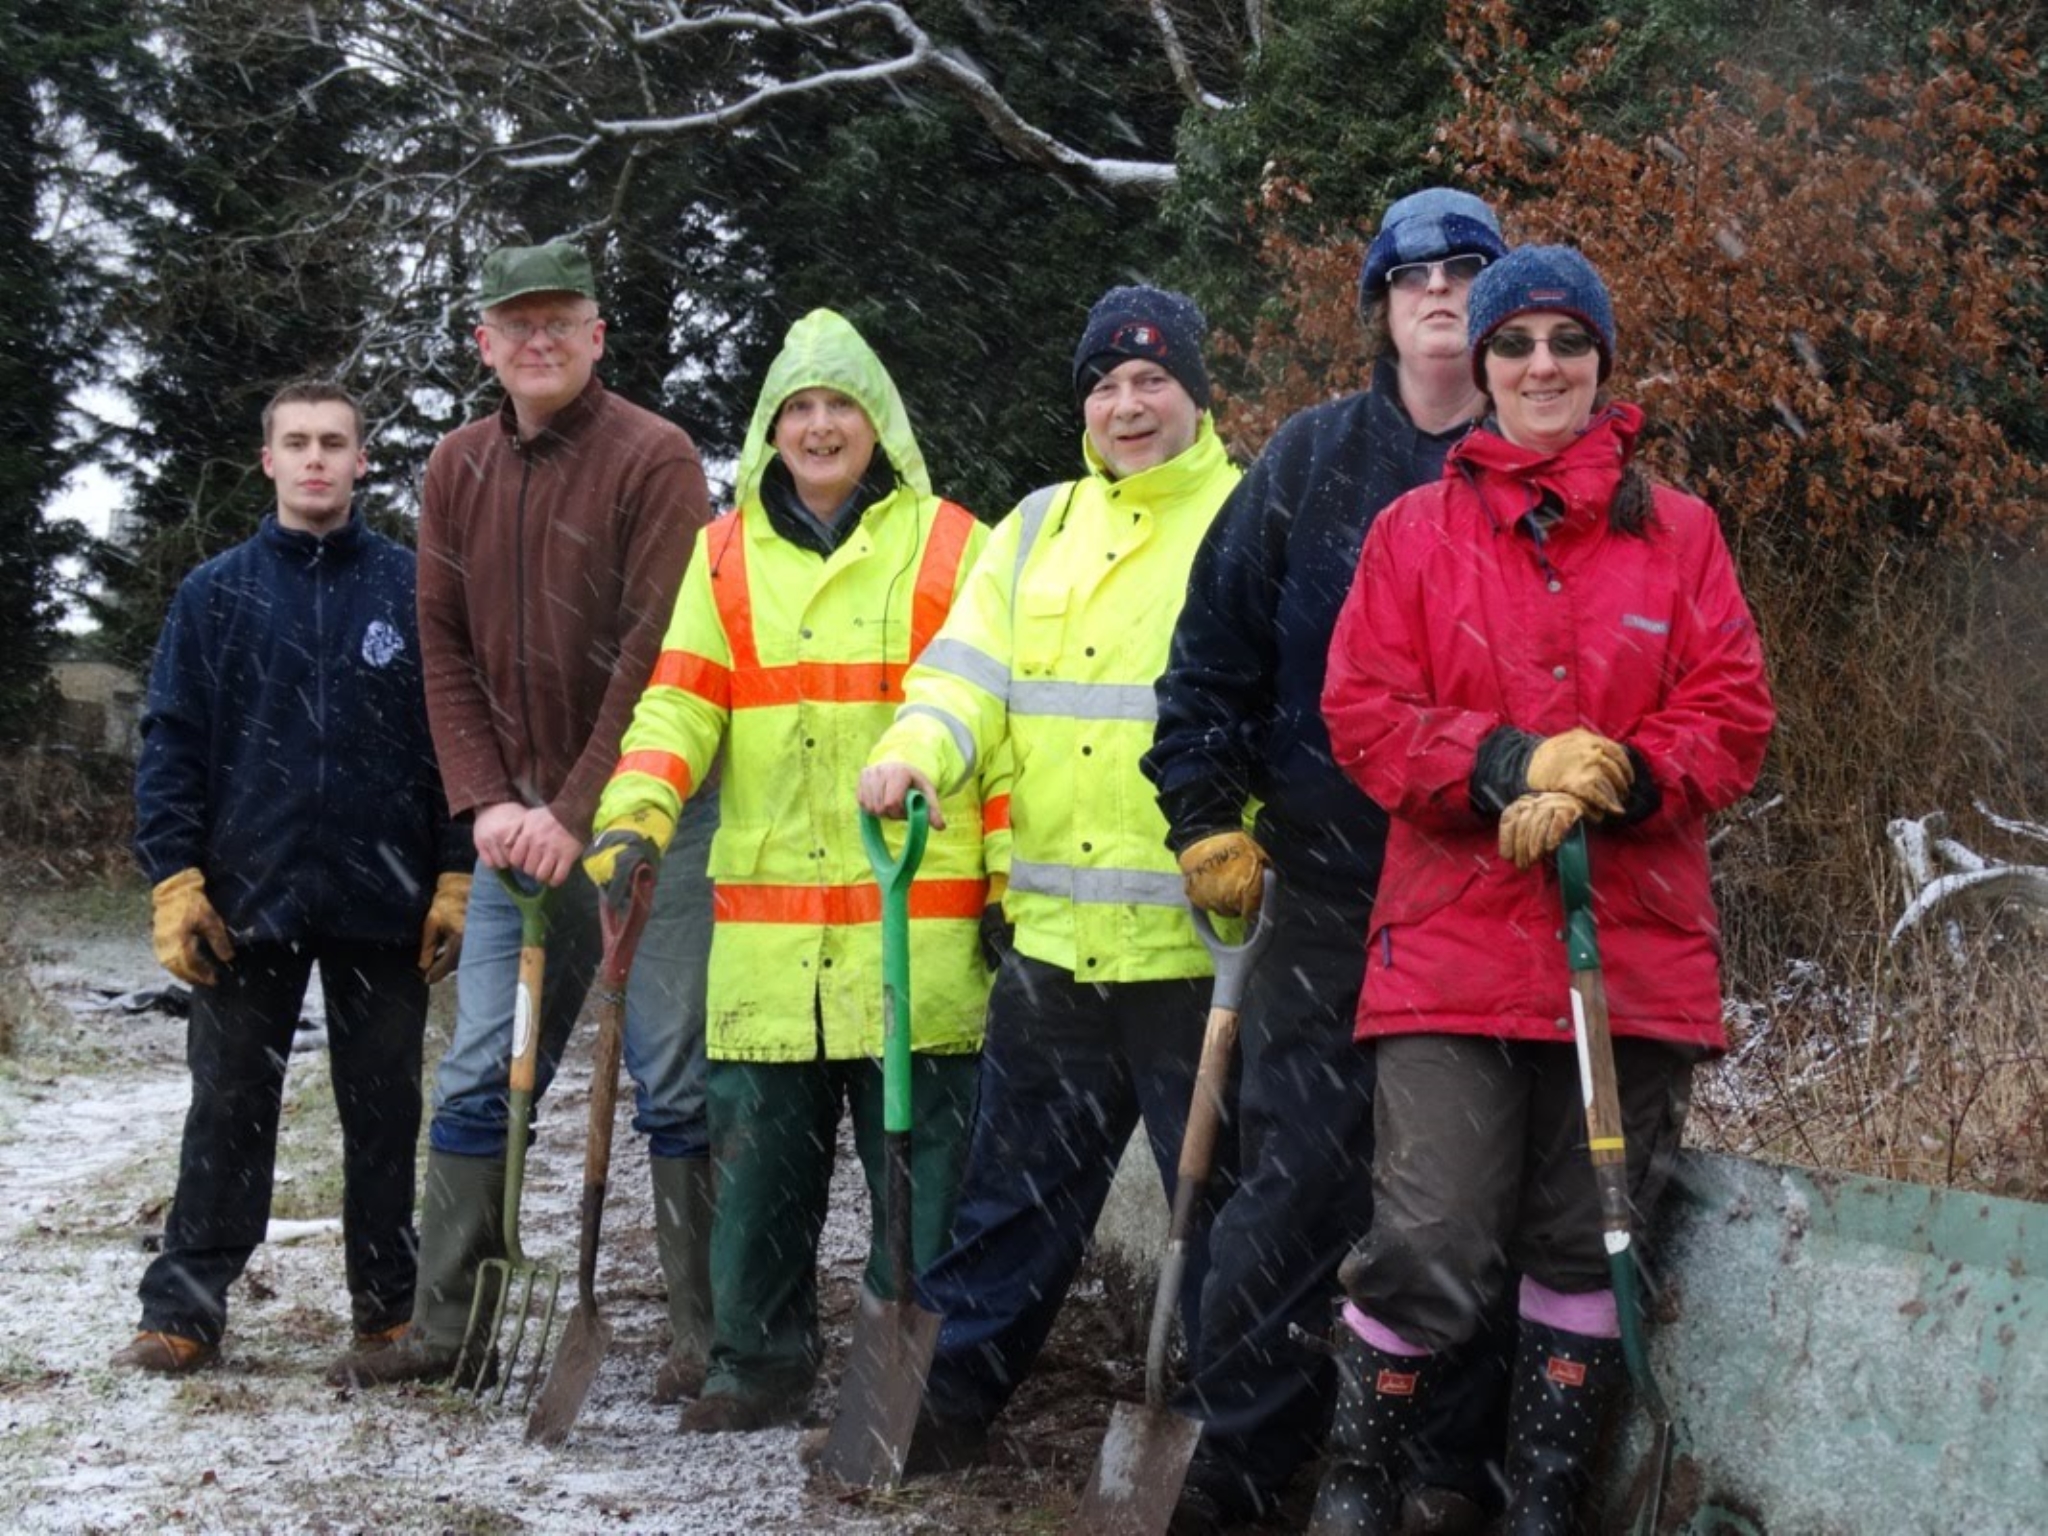 A photo from the FoTF Conservation Event - January 2018 - Erecting the Toad Fence at Cranwich : A group photo of of the volunteers standing beside a section of the erected fence